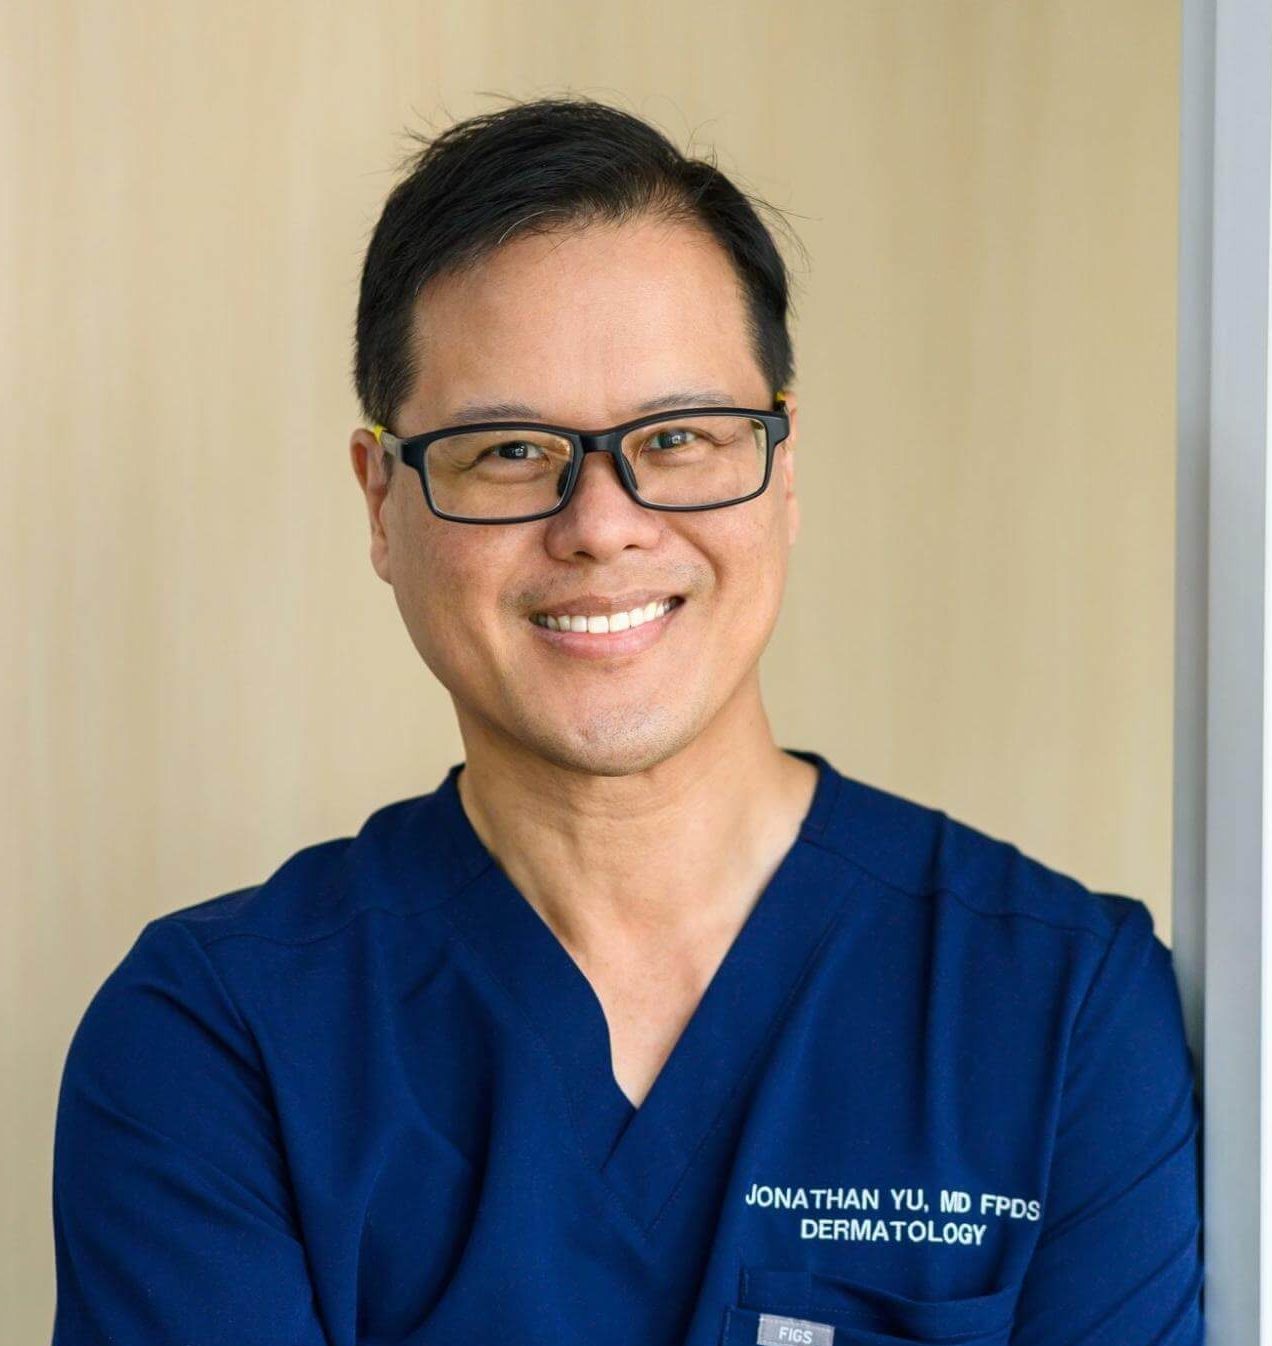 Dr Jon Yu - a board-certified dermatologist and aesthetic expert